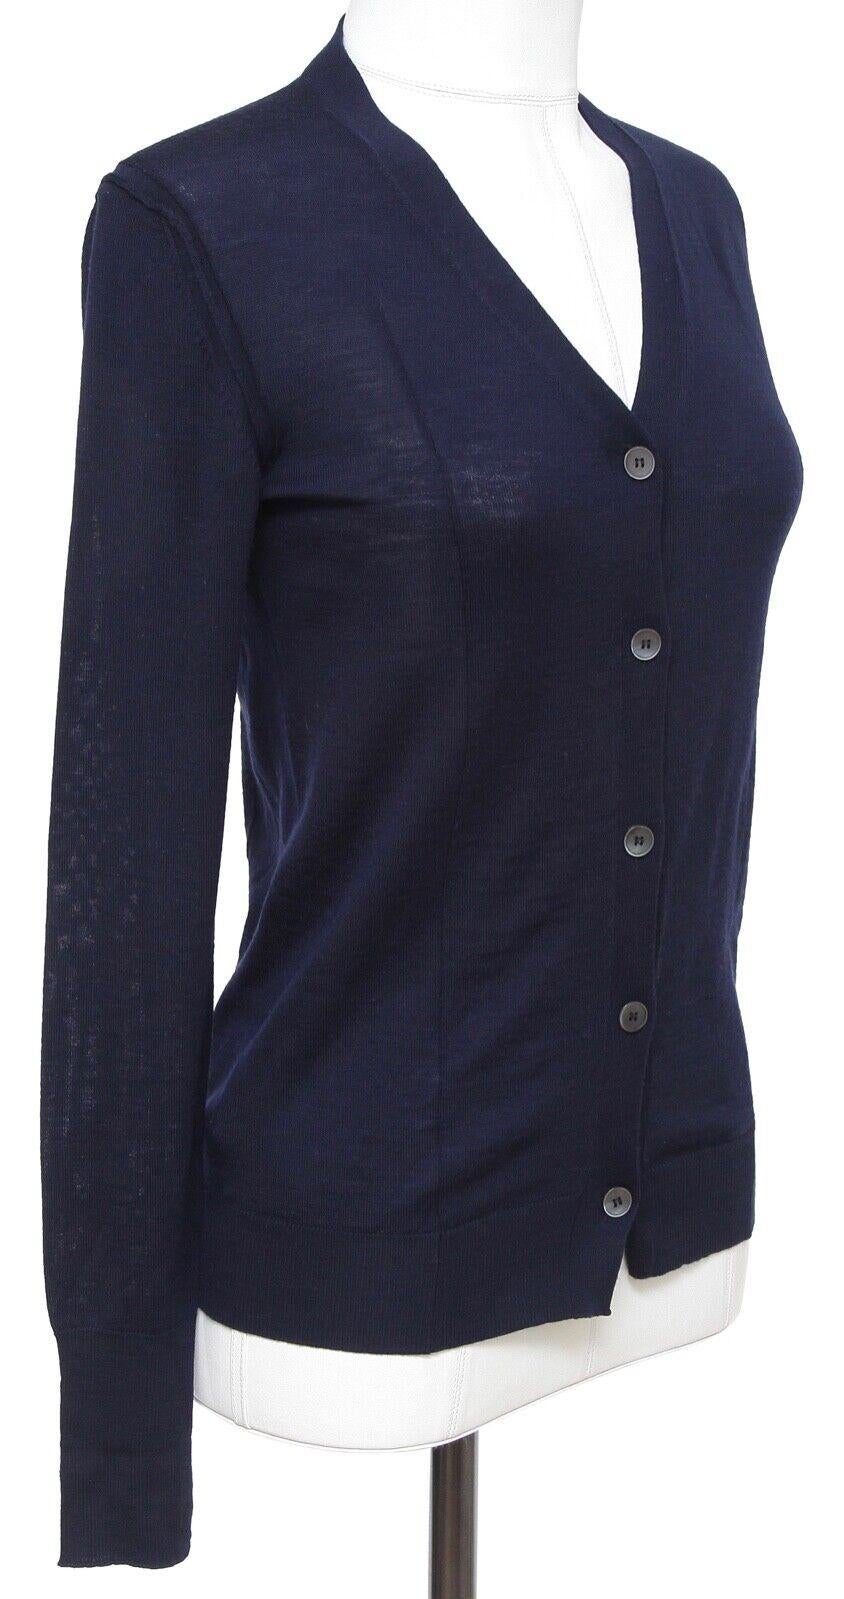 GUARANTEED AUTHENTIC CLASSIC MIU MIU NAVY BLUE LONG SLEEVE CARDIGAN


Details:
- Lightweight wool navy blue color button down cardigan.
- V-neck.
- Ribbing at neckline, sleeves and hem.
- Easy and year round great piece for your Miu Miu